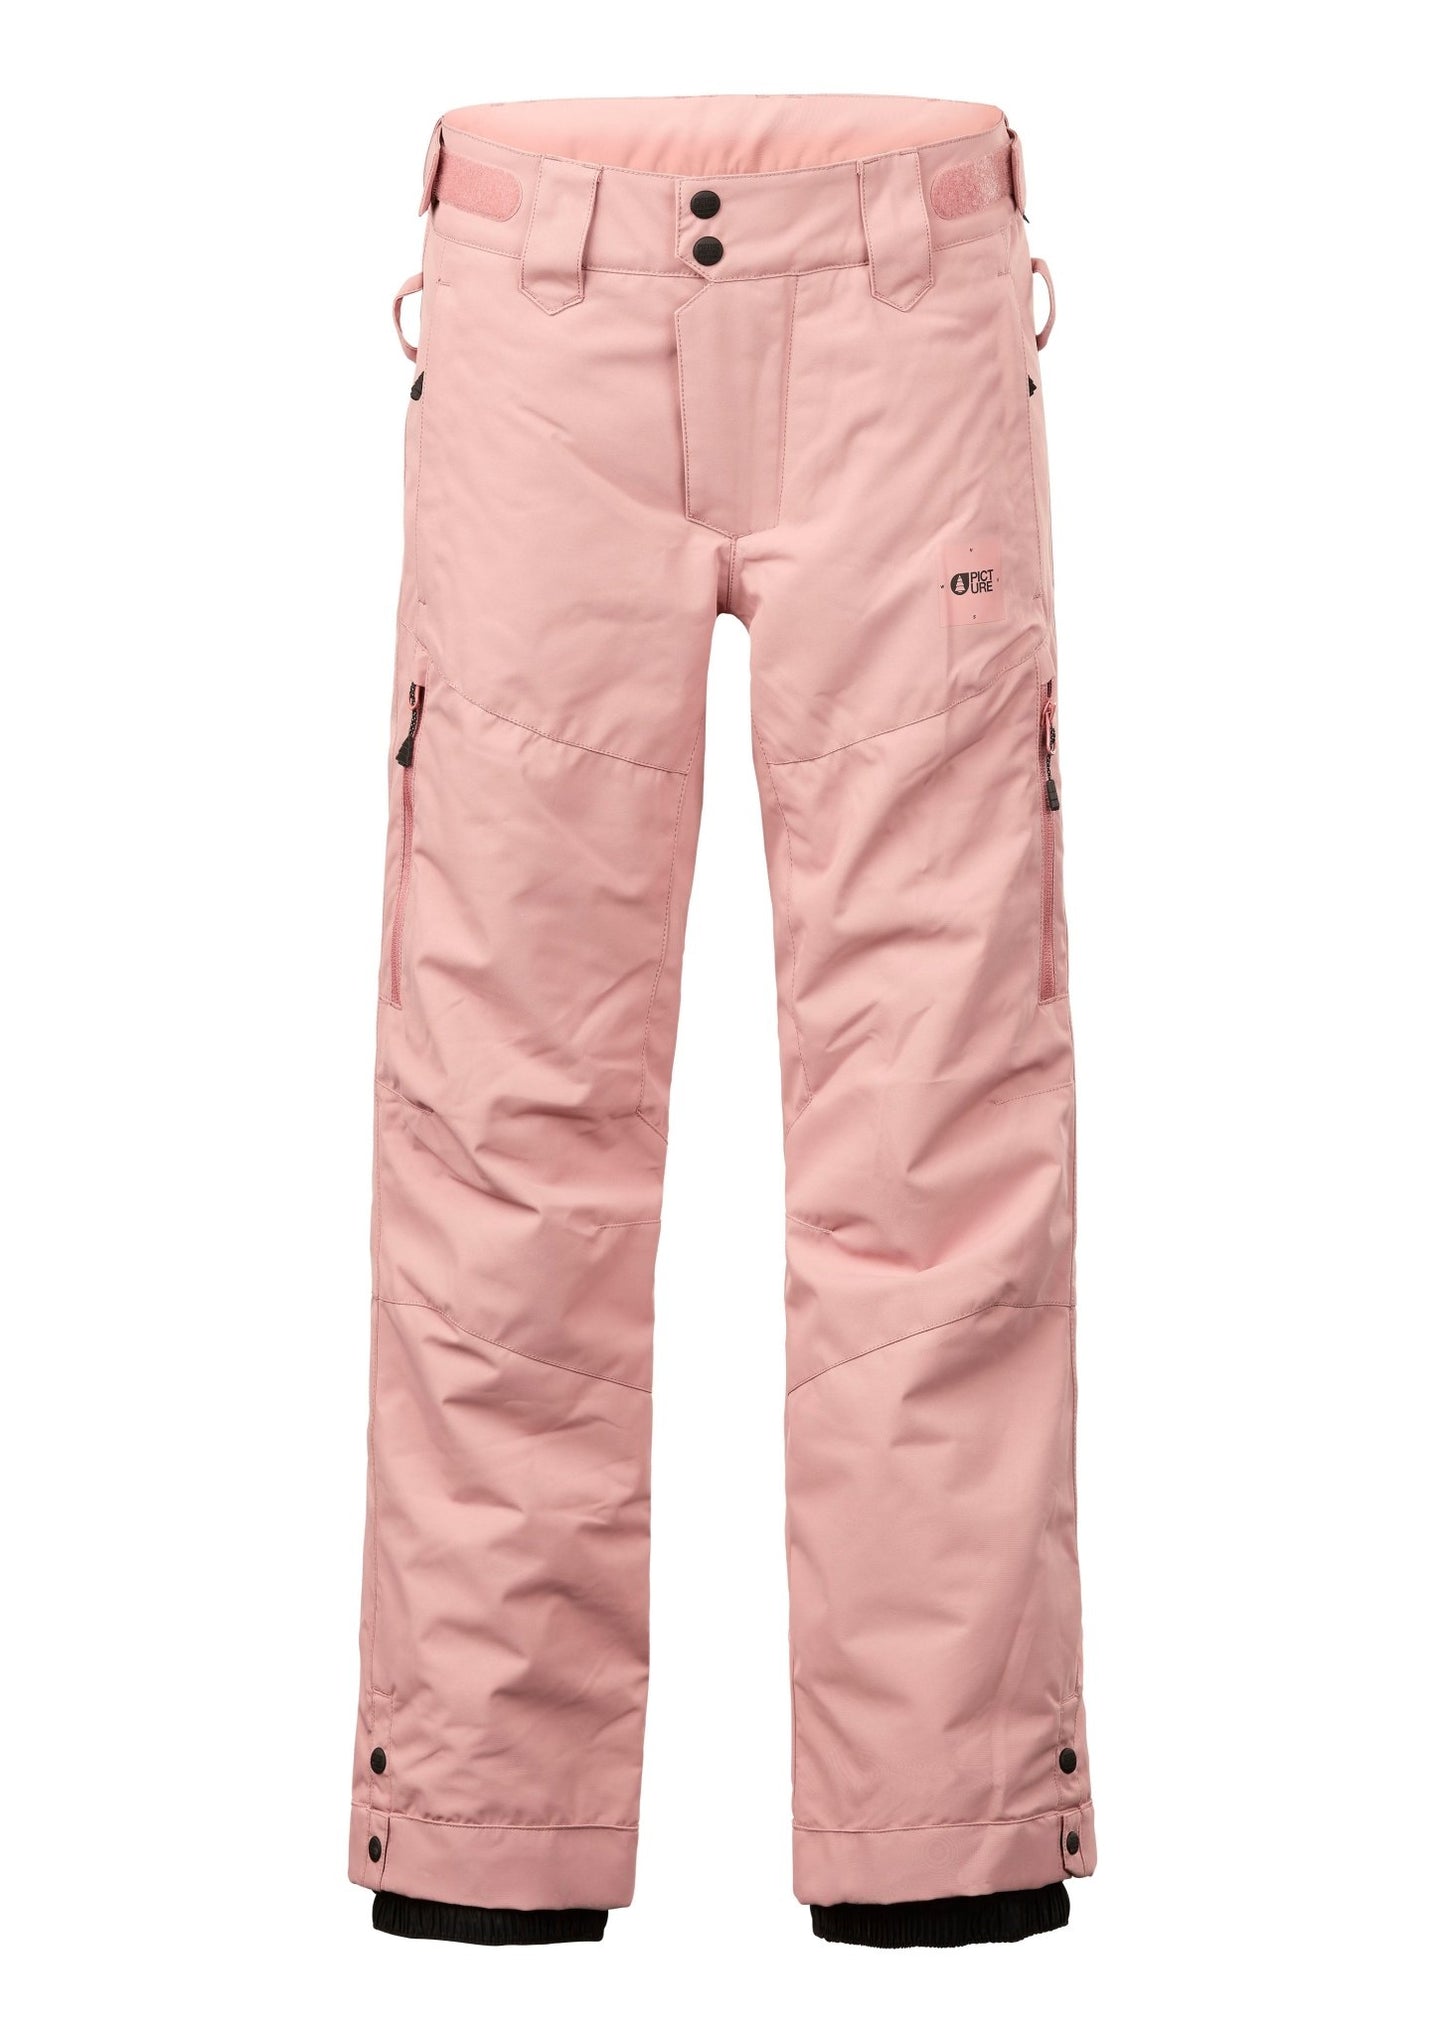 Picture Time Kids Pant W23 - Snowride Sports